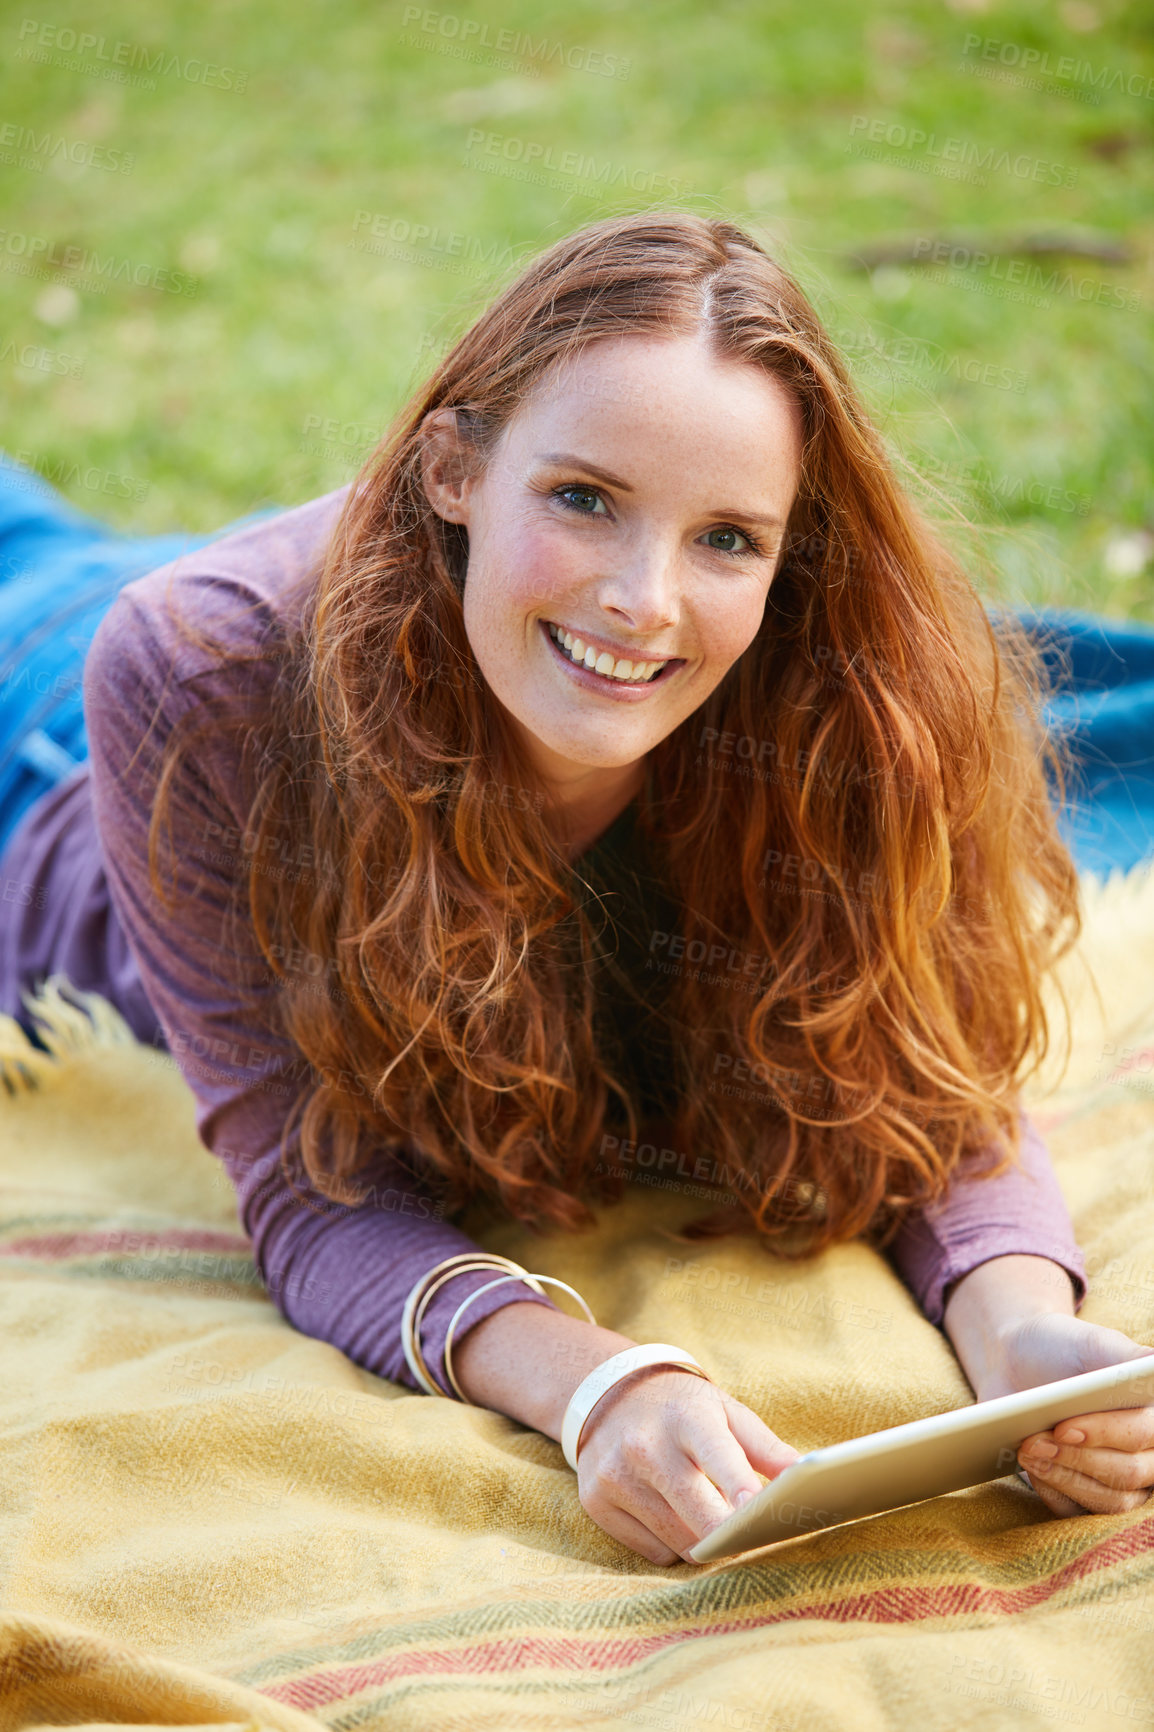 Buy stock photo Shot of a young woman using her tablet while relaxing at the park